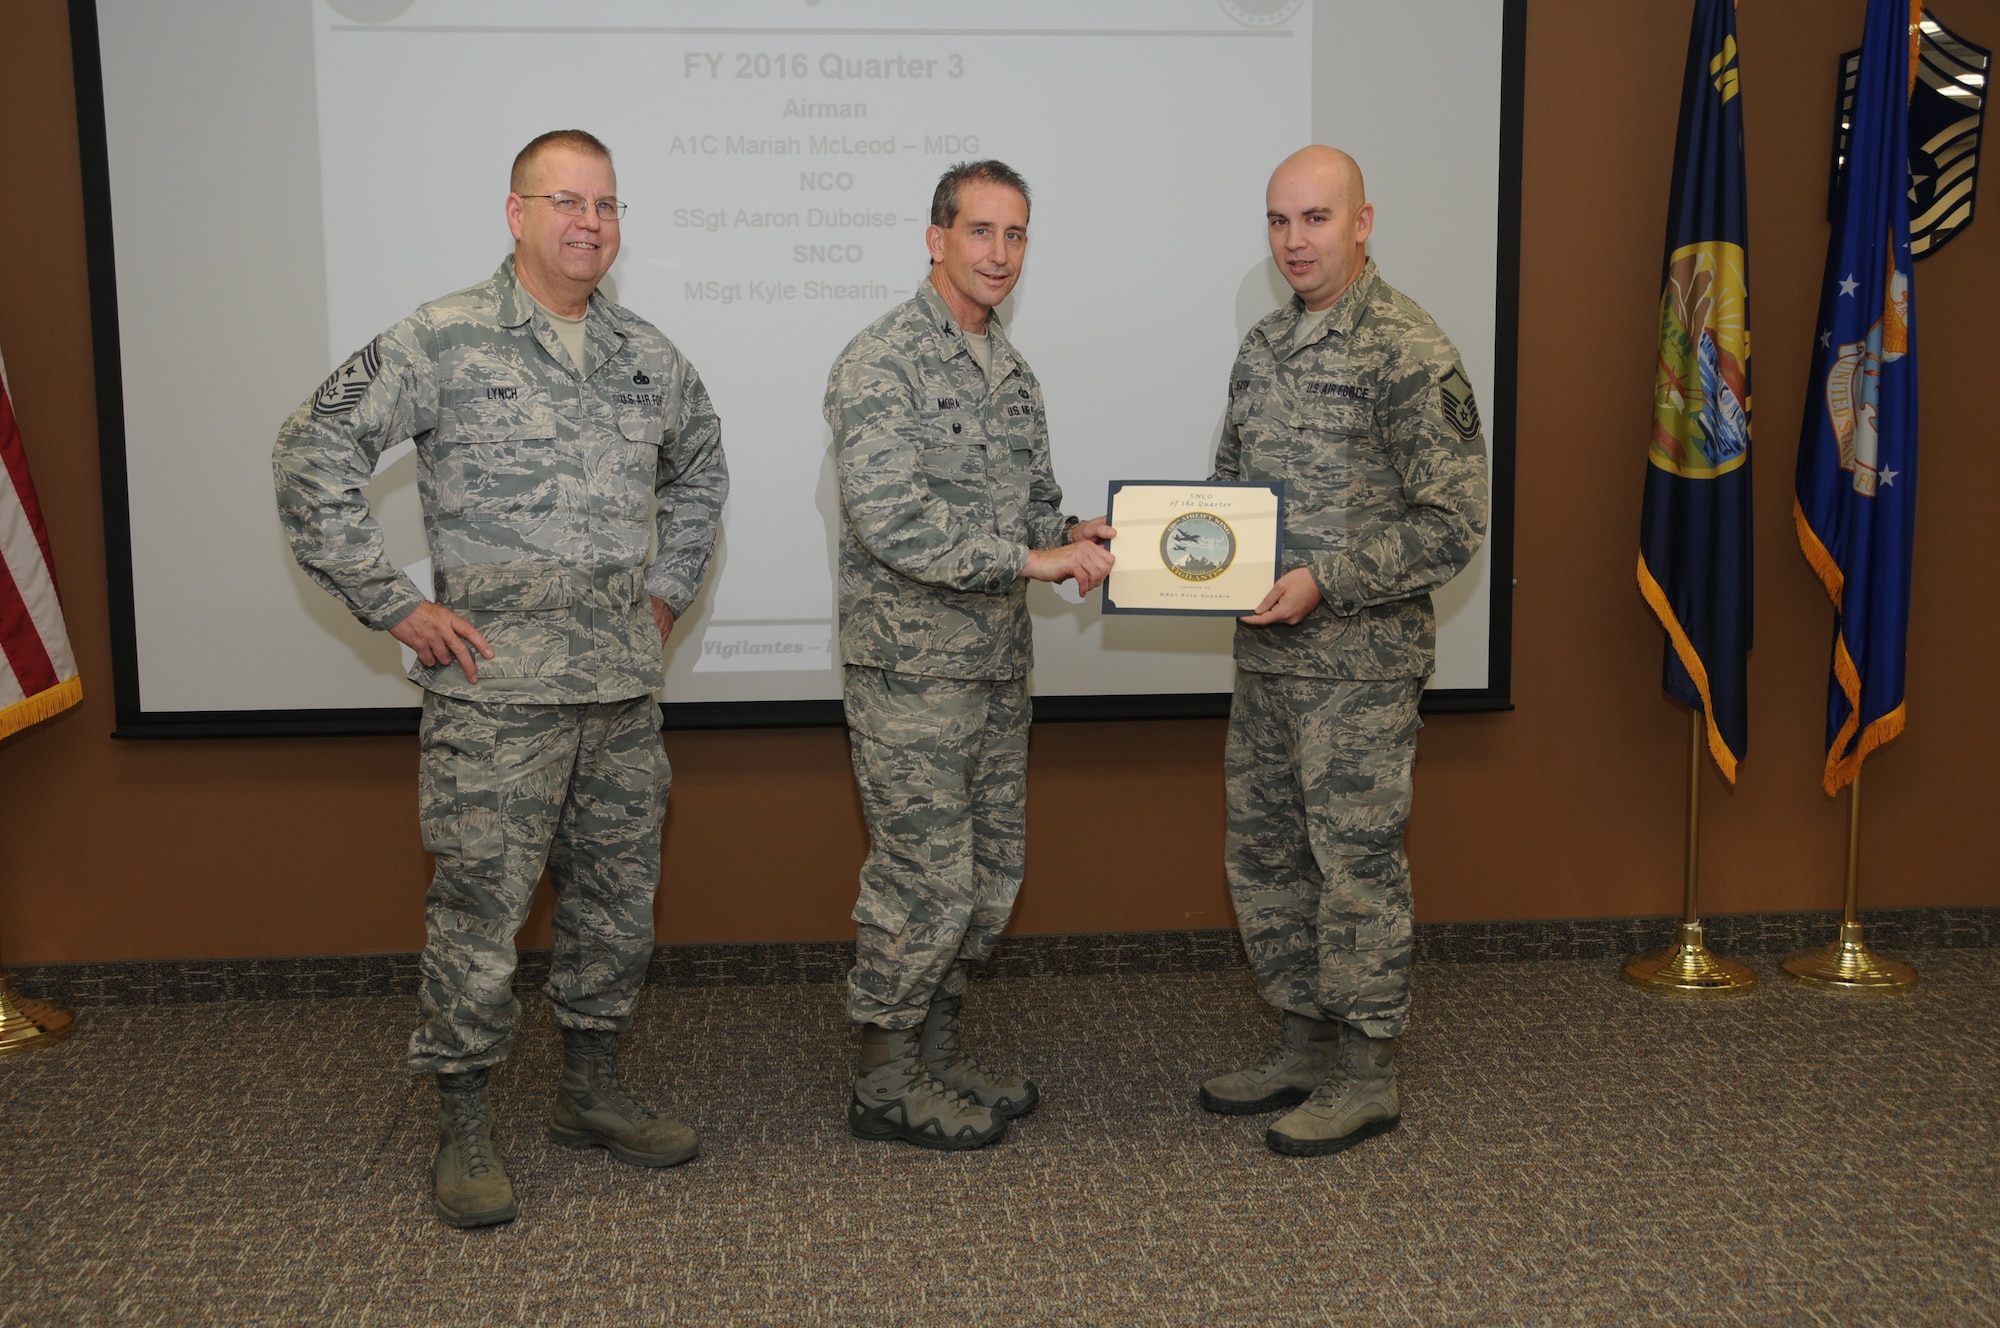 120th Airlift Wing Vice Commander Col. Thomas Mora and 120th AW Command Chief Master Sgt. Steven Lynch presented the Fiscal Year 2016 3rd quarter award winners for the 120th Airlift Wing of the Montana Air National Guard during the Stand-up Briefing held in the Larsen Room of the wing headquarters building Nov. 4, 2016. Public Health Craftsman Sgt. Kyle Shearin from the 120th Medical Group won in the senior noncommissioned officer category.